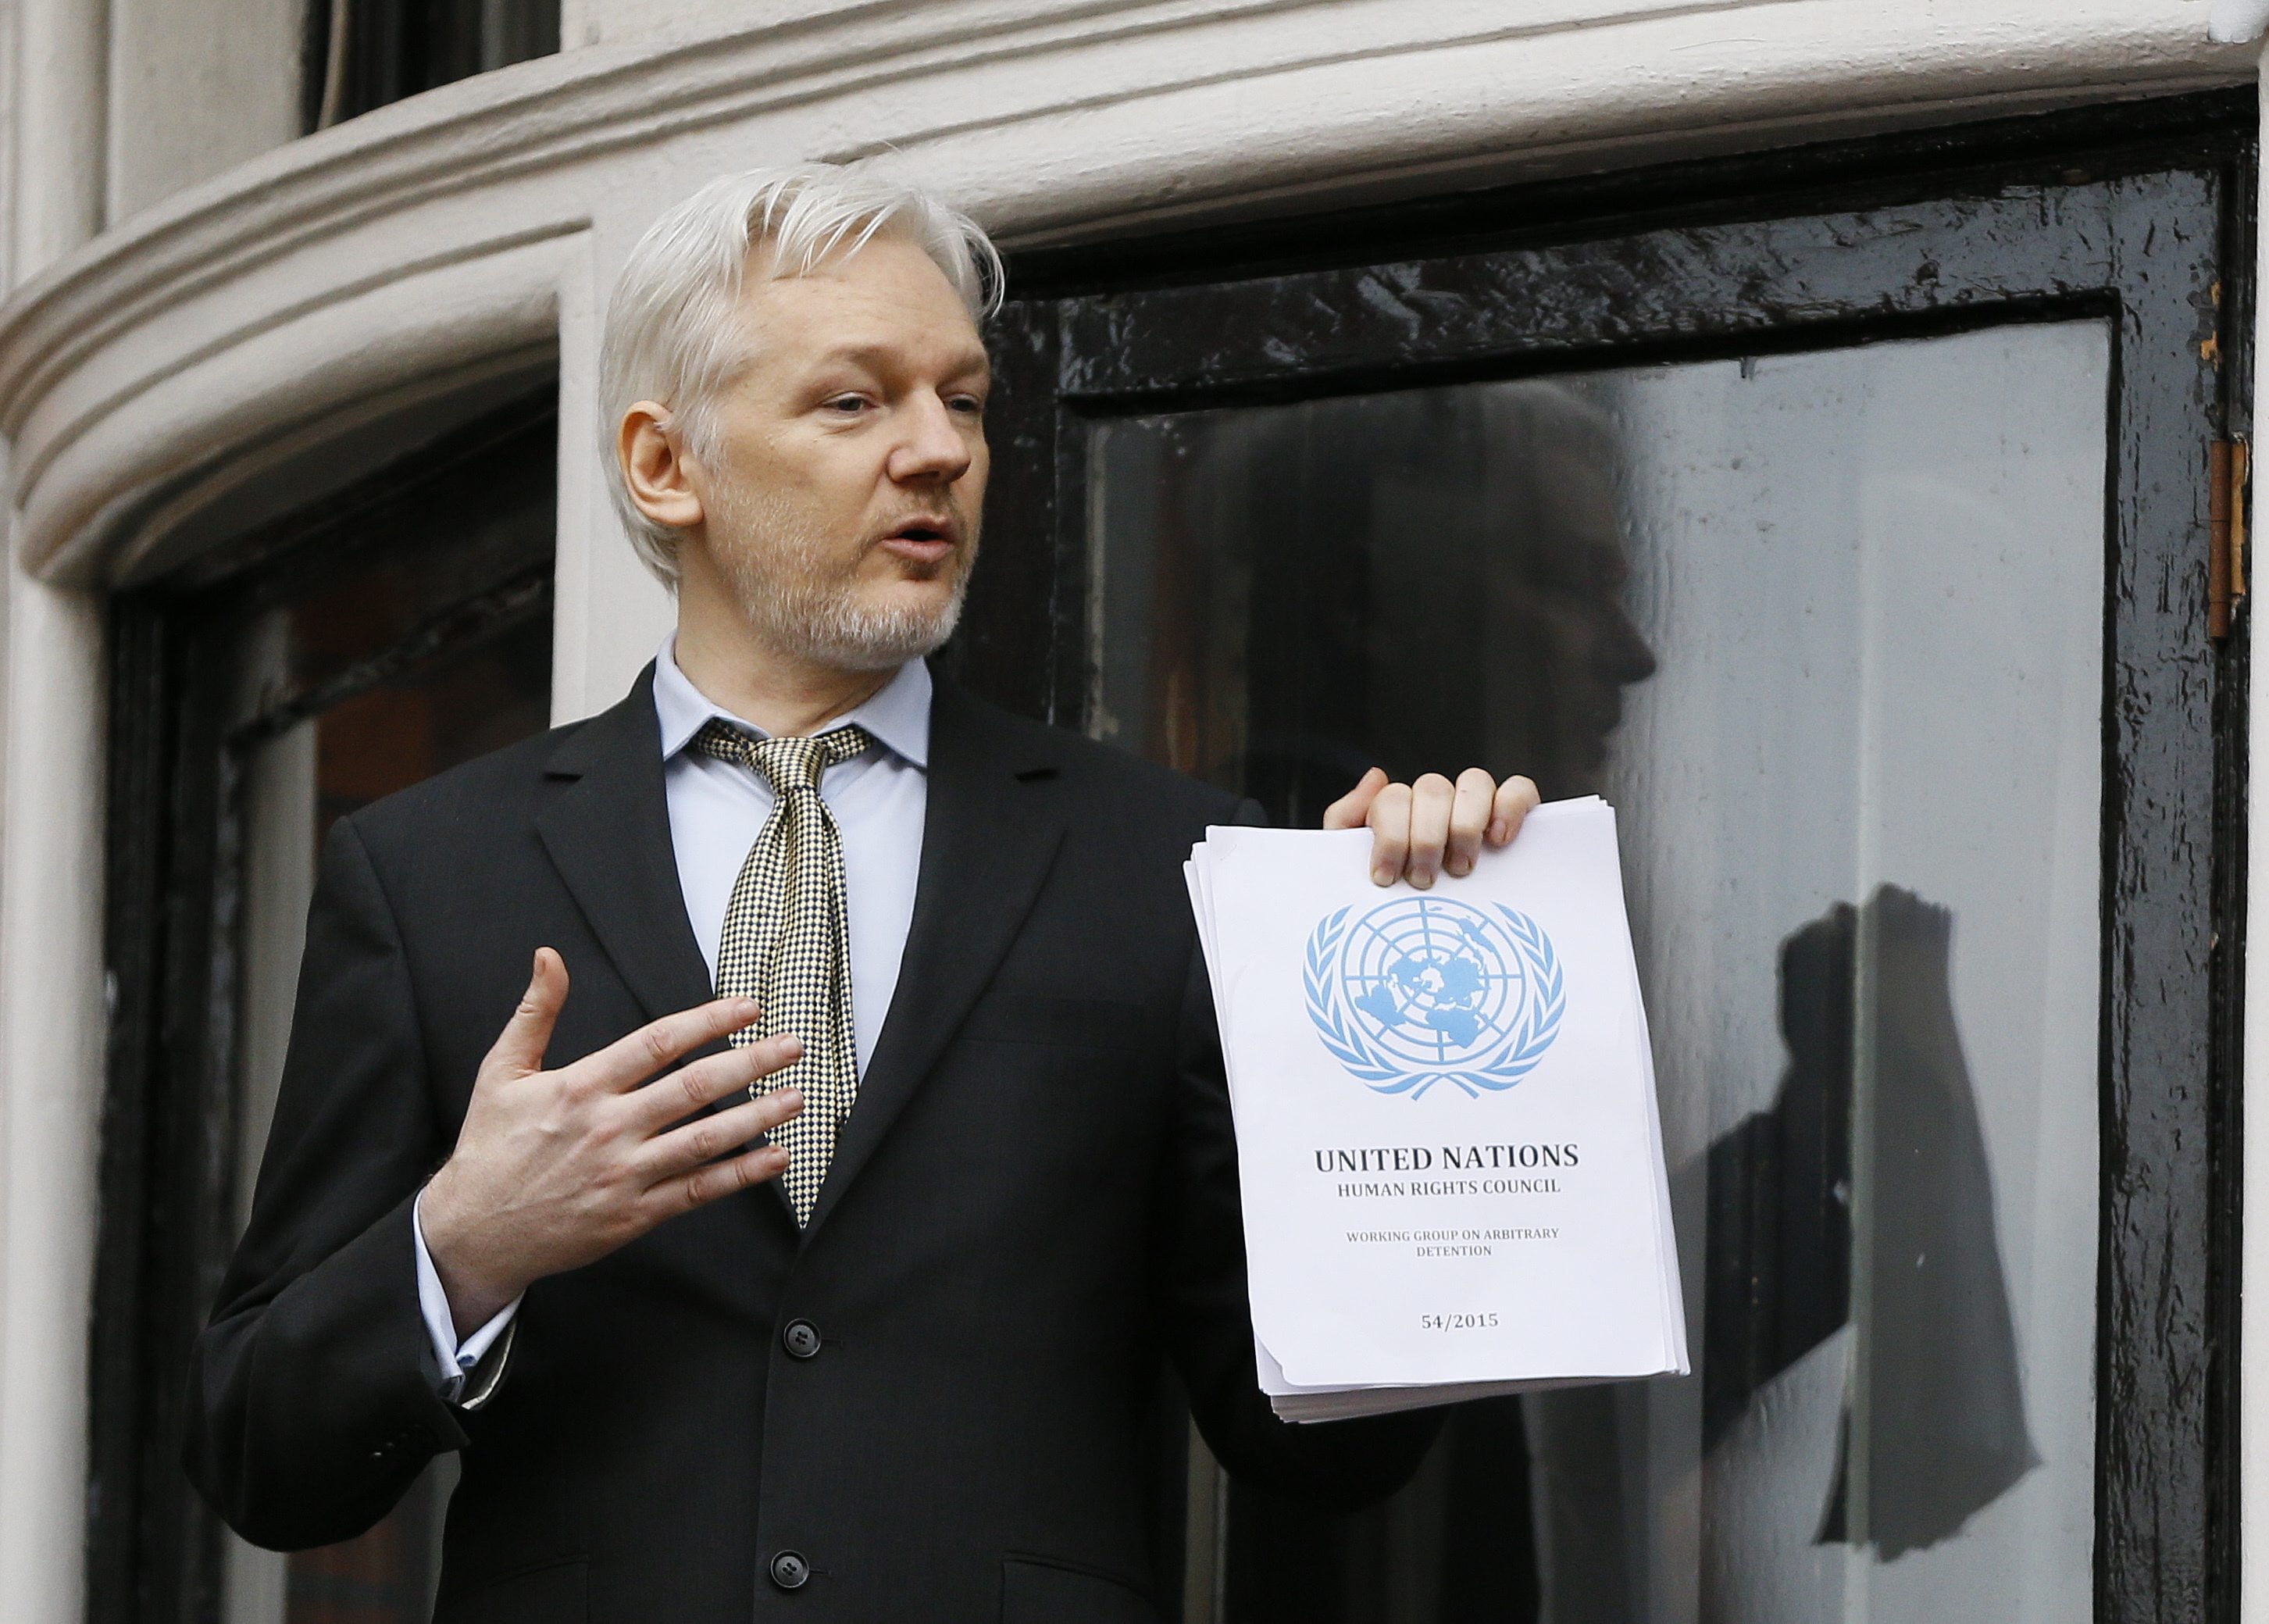 Wikileaks founder Julian Assange. holding a U.N. report, speaks Friday on the balcony of the Ecuadorean Embassy in London. A U.N. human rights panel says Assange, who has been squirreled away inside the Ecuadorean Embassy to avoid questioning by Swedish authorities about sexual misconduct allegations, has been "arbitrarily detained" by Britain and Sweden since December 2010. The U.N. Working Group on Arbitrary Detention said his detention should end and he should be entitled to compensation.